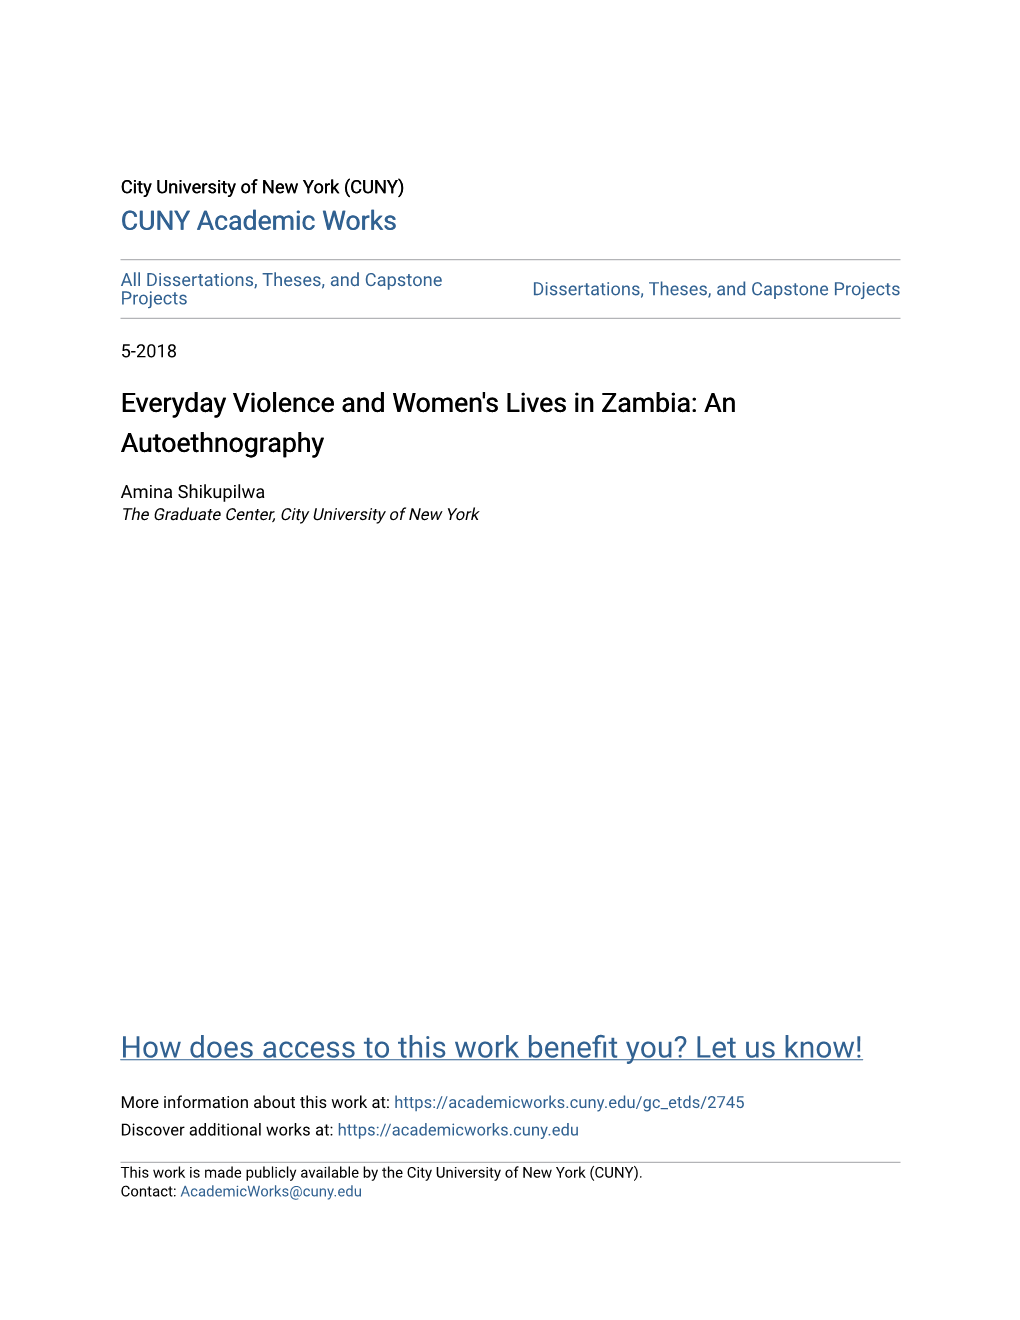 Everyday Violence and Women's Lives in Zambia: an Autoethnography